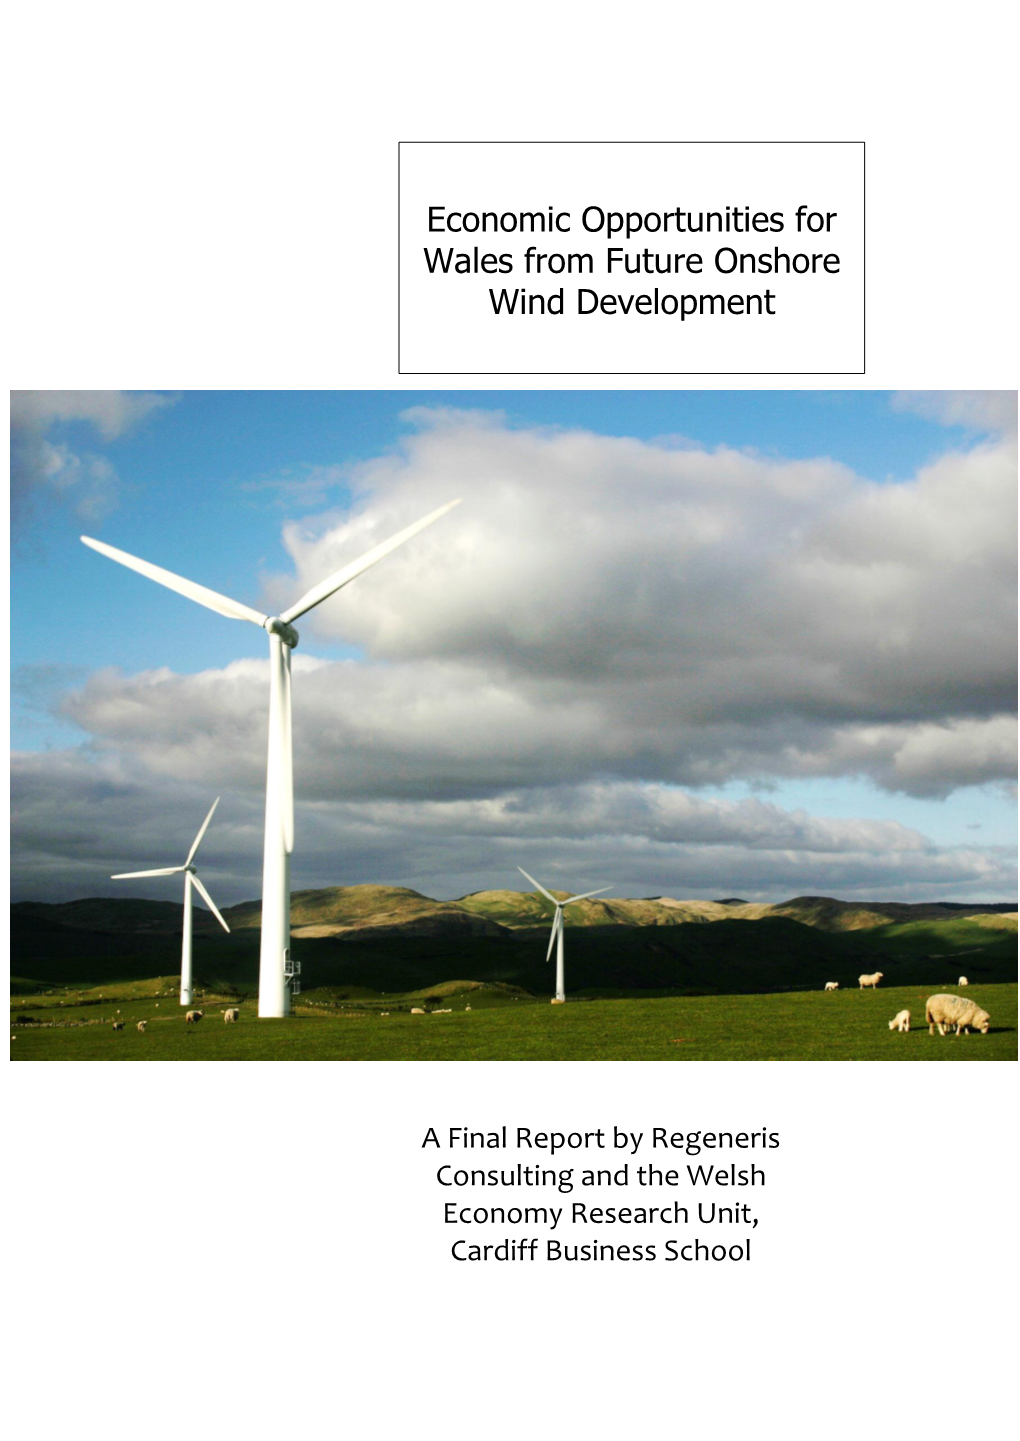 Economic Opportunities for Wales from Onshore Wind